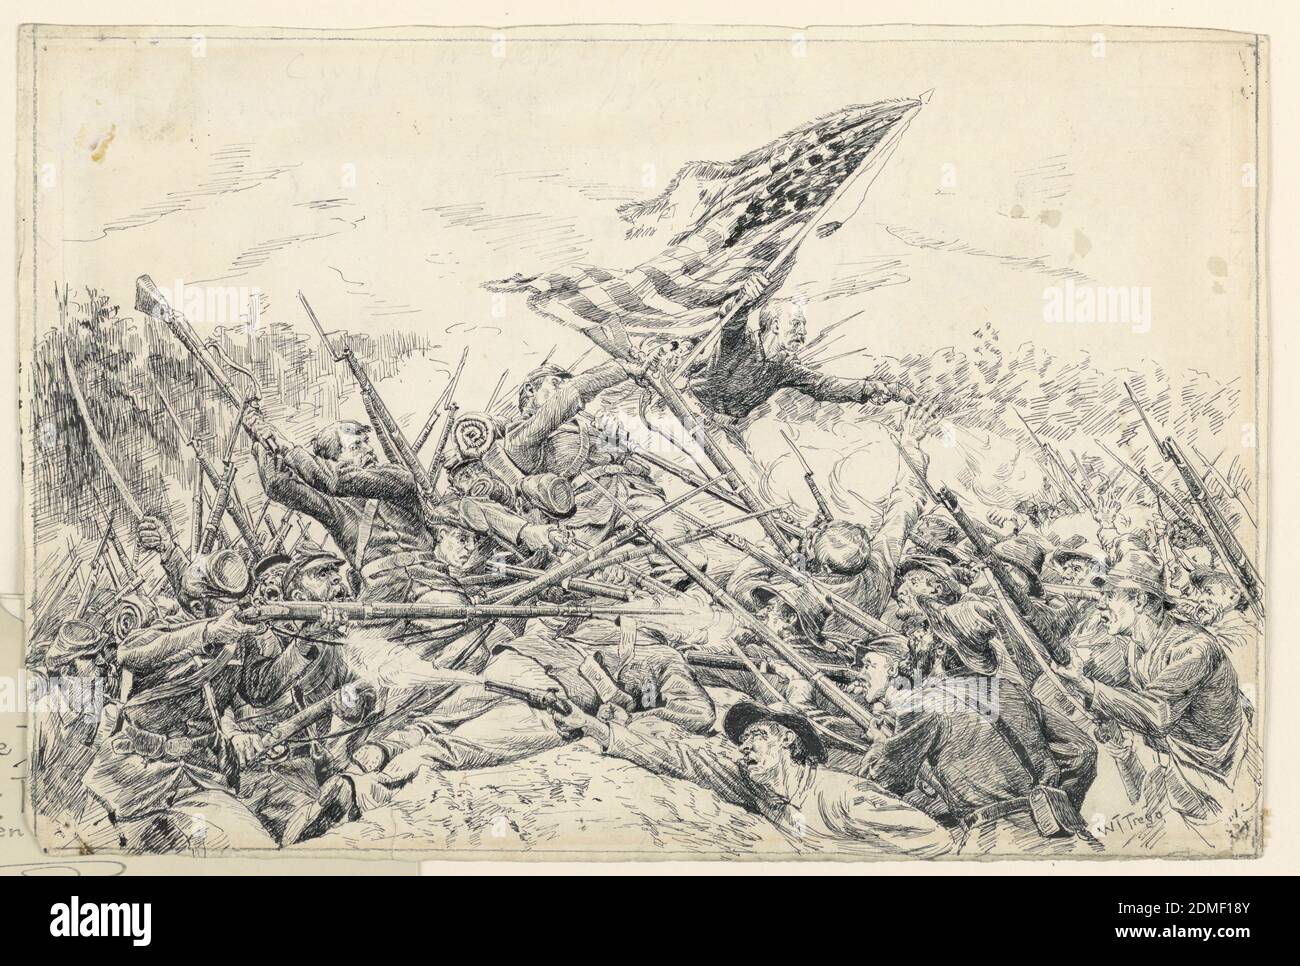 Hancock's Corps Assaulting the Works at the 'Bloody Angle', William Brooke Thomas Trego, American, 1859 - 1909, Pen and black ink on wove paper, The Union and Confederate troops in hand-to-hand combat., Spotsylvania Courthouse, Virginia, USA, 1887, figures, Drawing Stock Photo